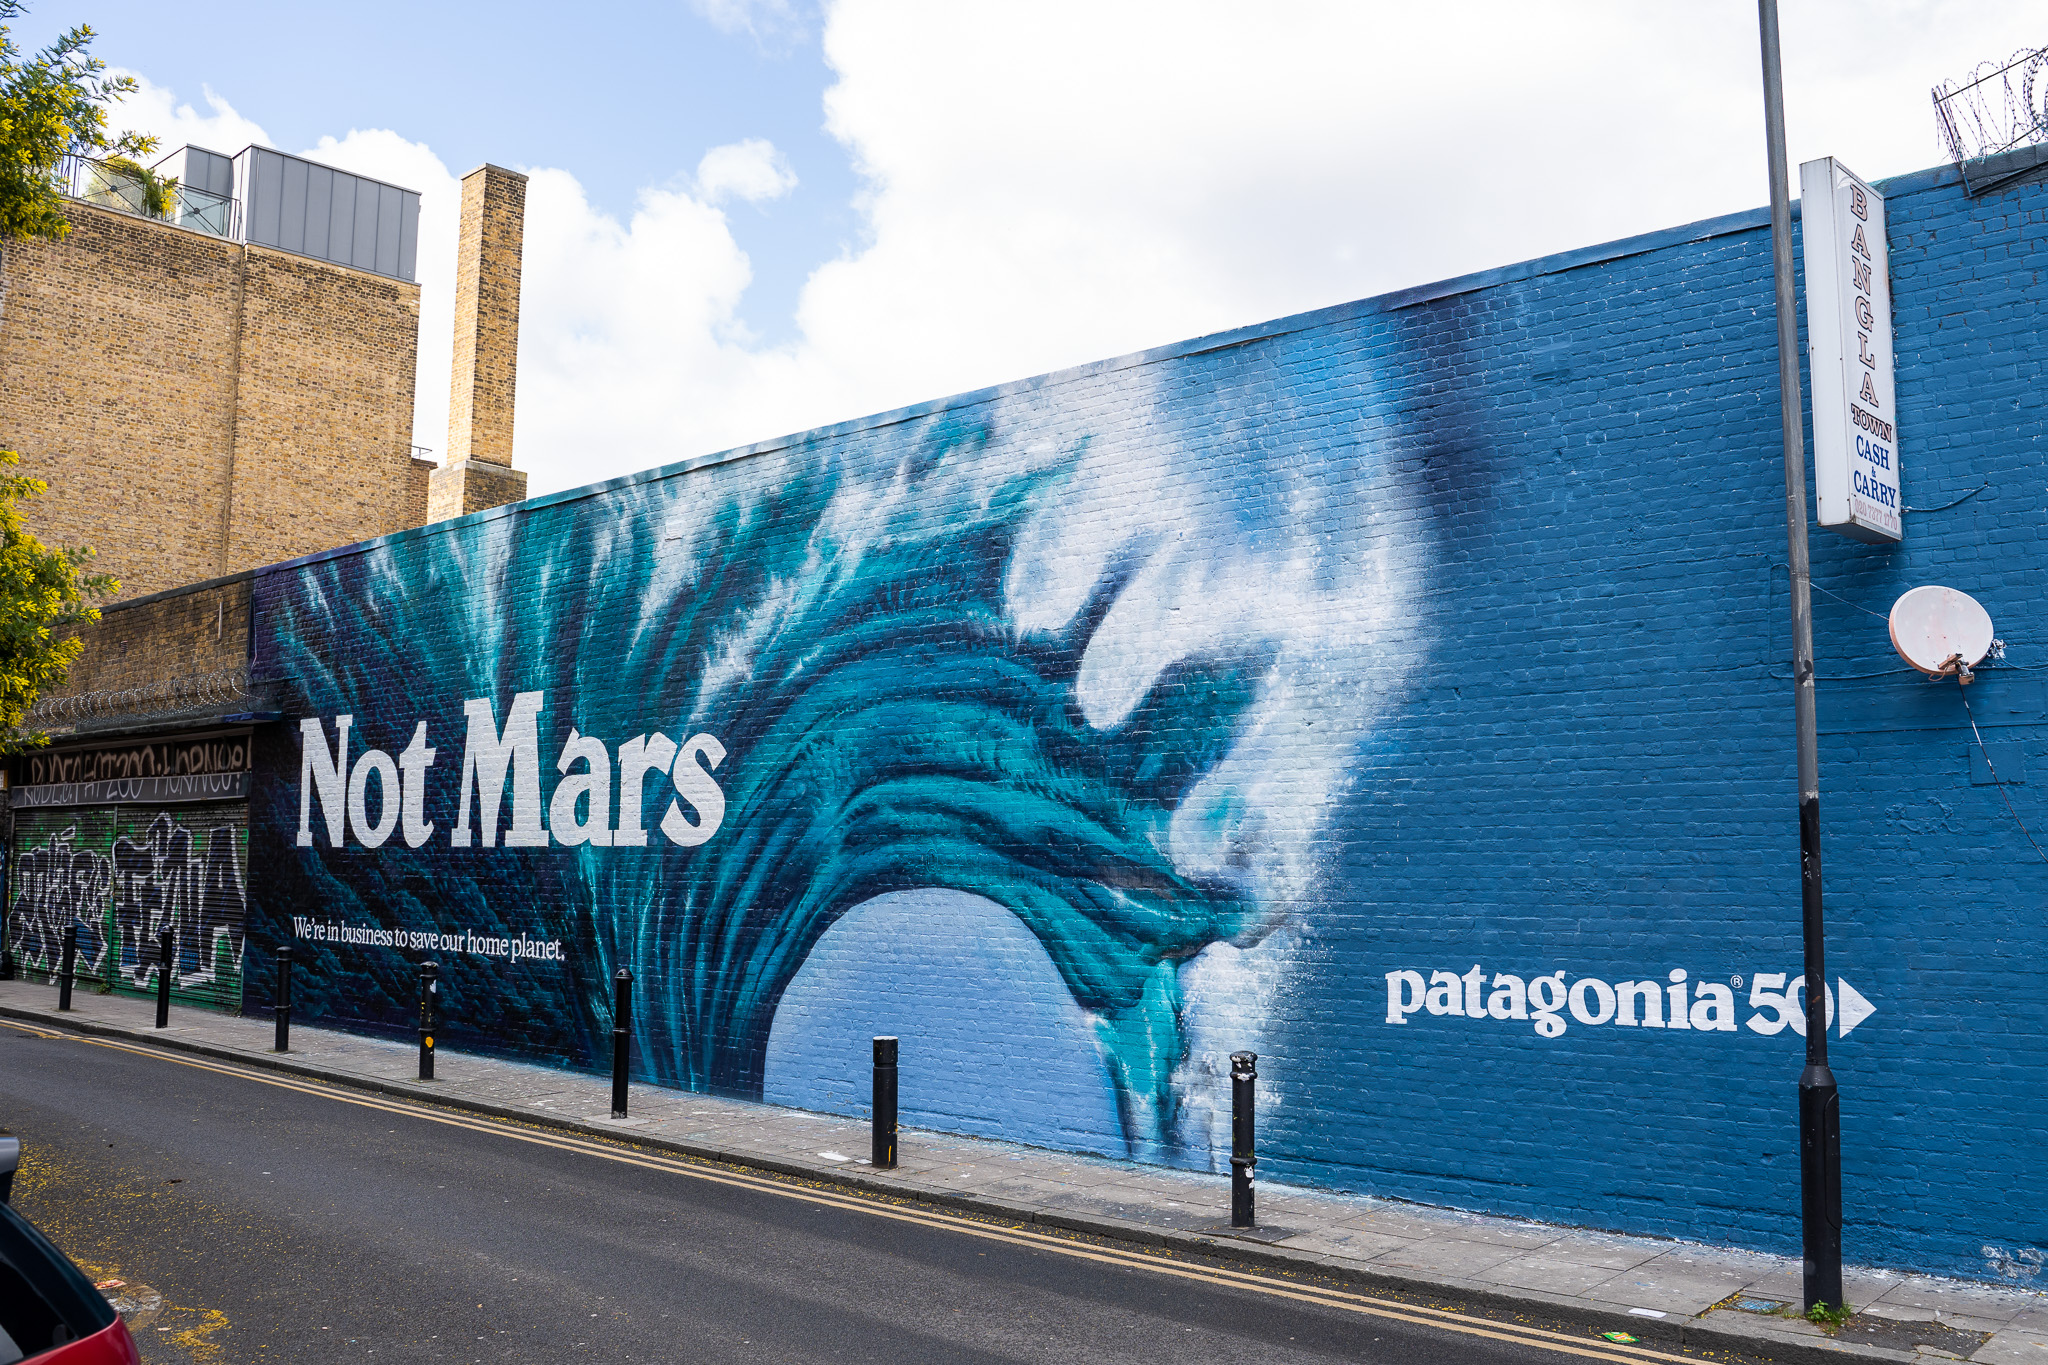 Patagonia at 50 - thanks to Lawless Studio on the Hanbury Street Wall